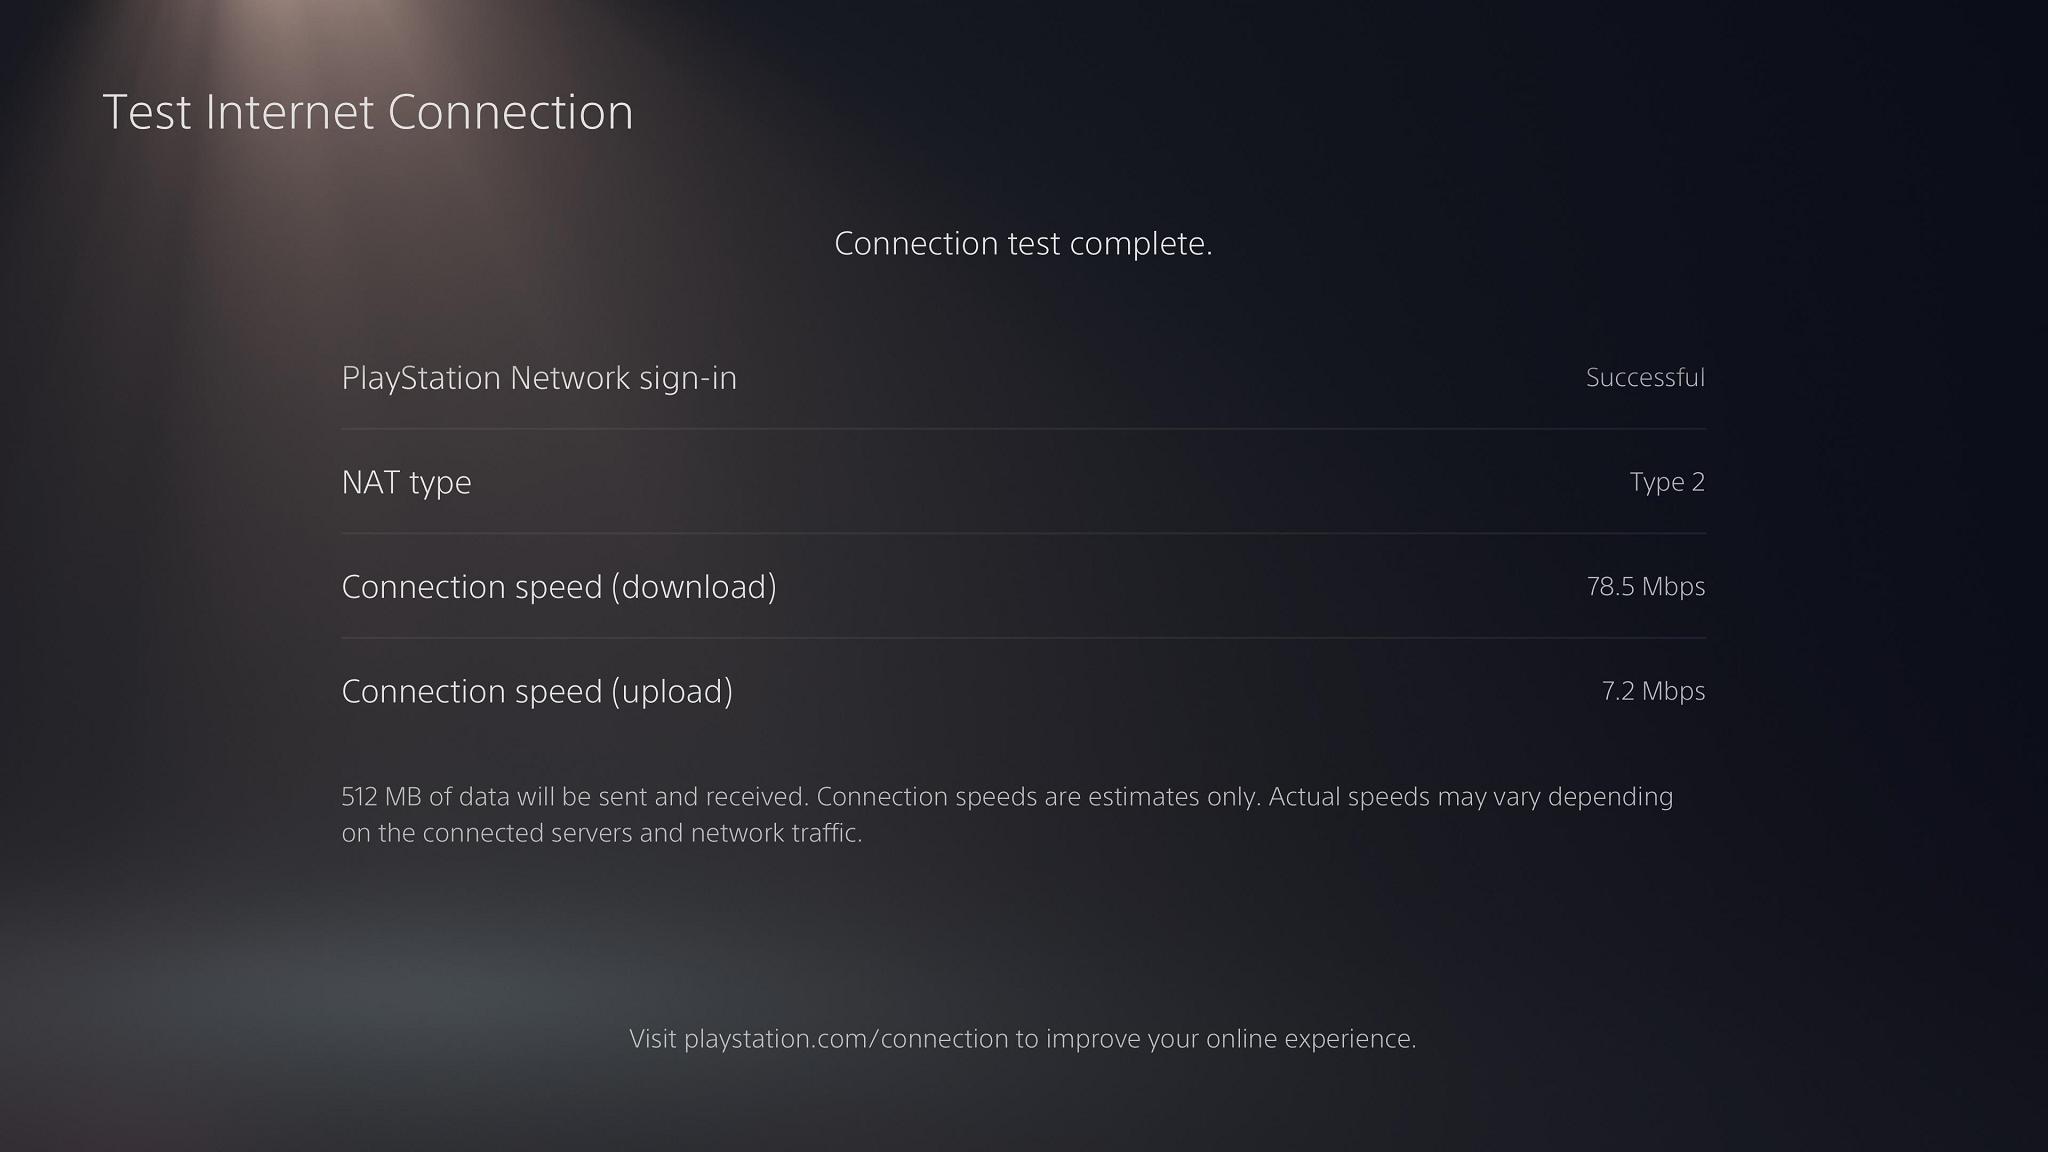 Check internet speed on PS5: PS5 Test Internet Connection